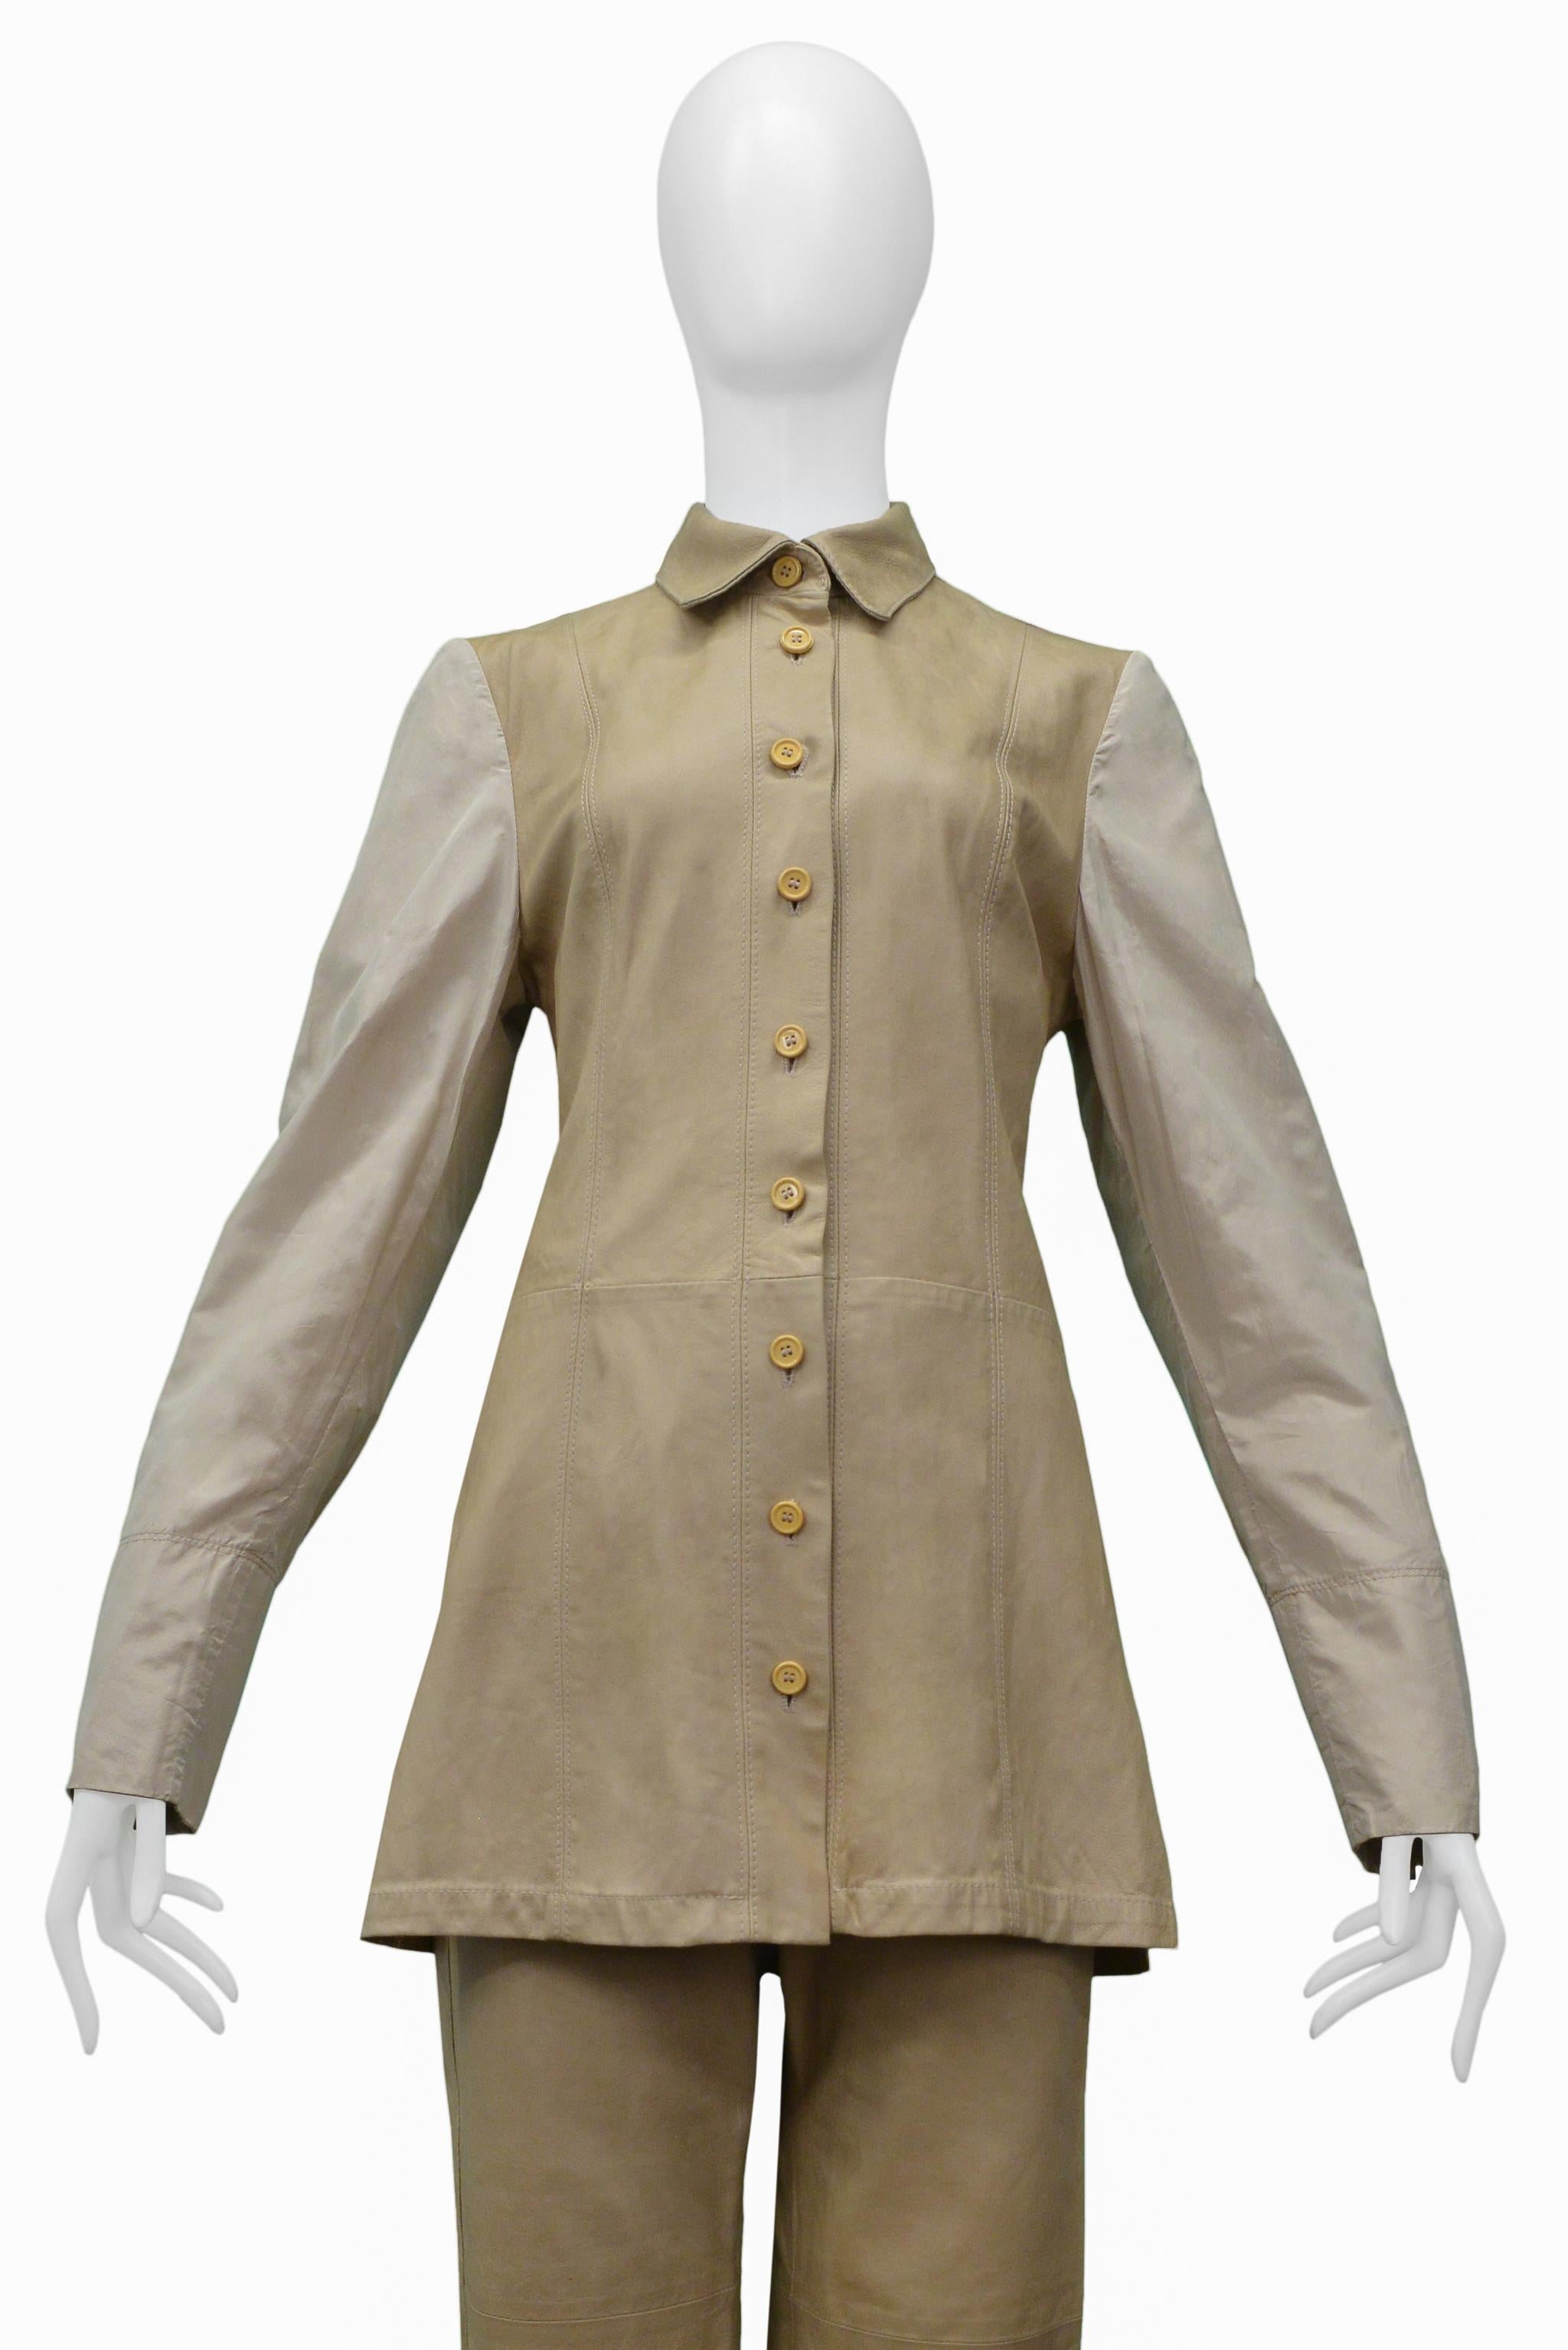 Resurrection Vintage is excited to offer a vintage Gianfranco Ferre beige suede, leather, and acetate ensemble featuring a suede shirt jacket with woven sleeves, and matching leather cropped pants with cuffs. 

Gianfranco Ferre
Size 40/40
Suede and